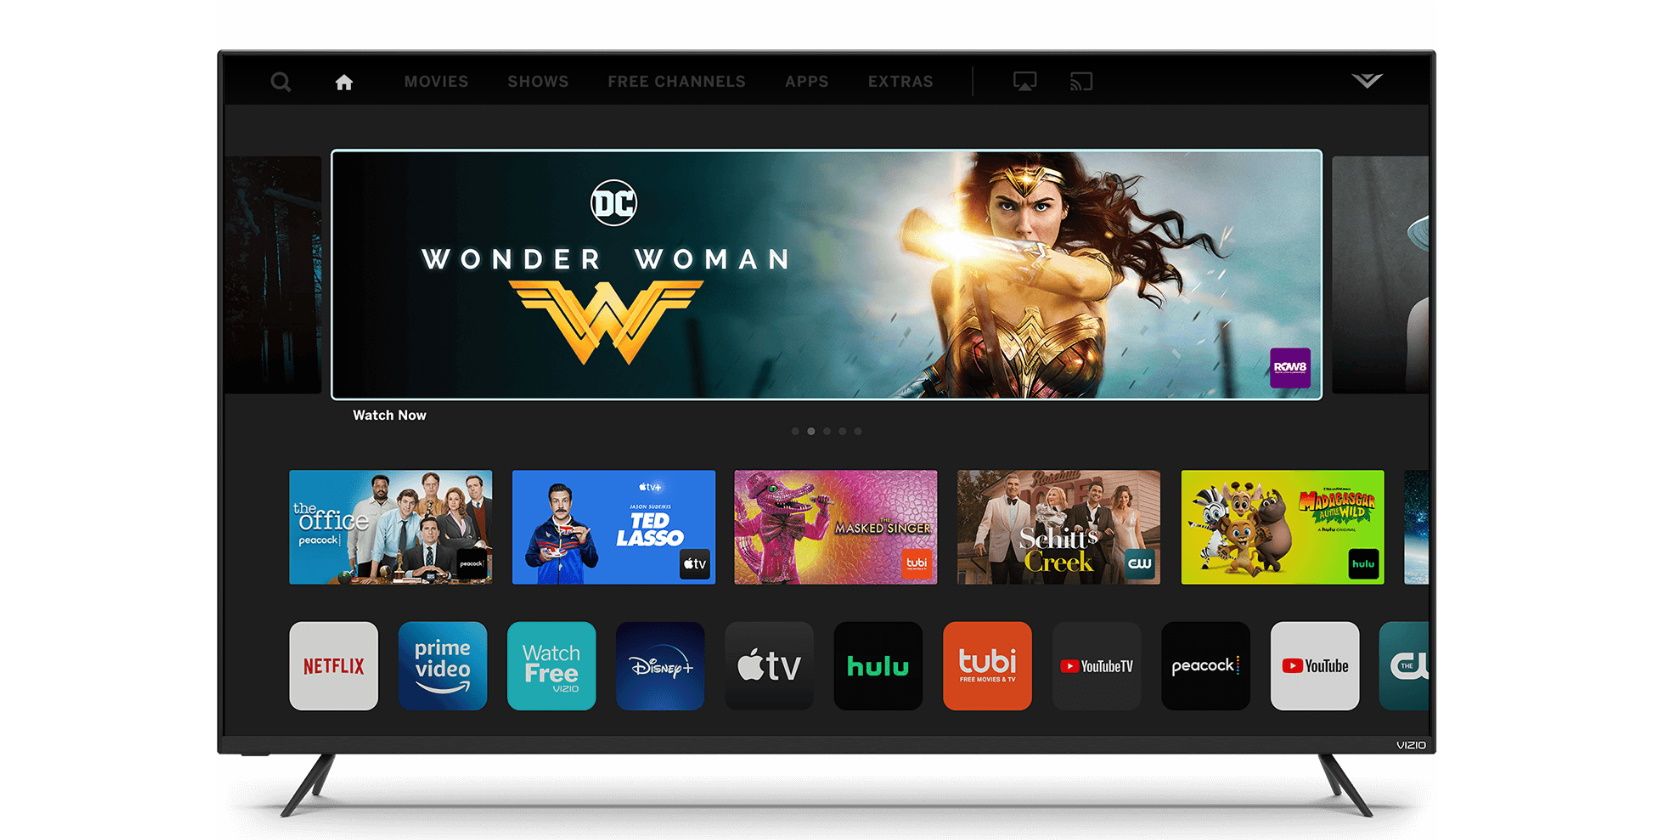 How to Add Apps to VIZIO Smart TV with VIZIO Internet Apps?